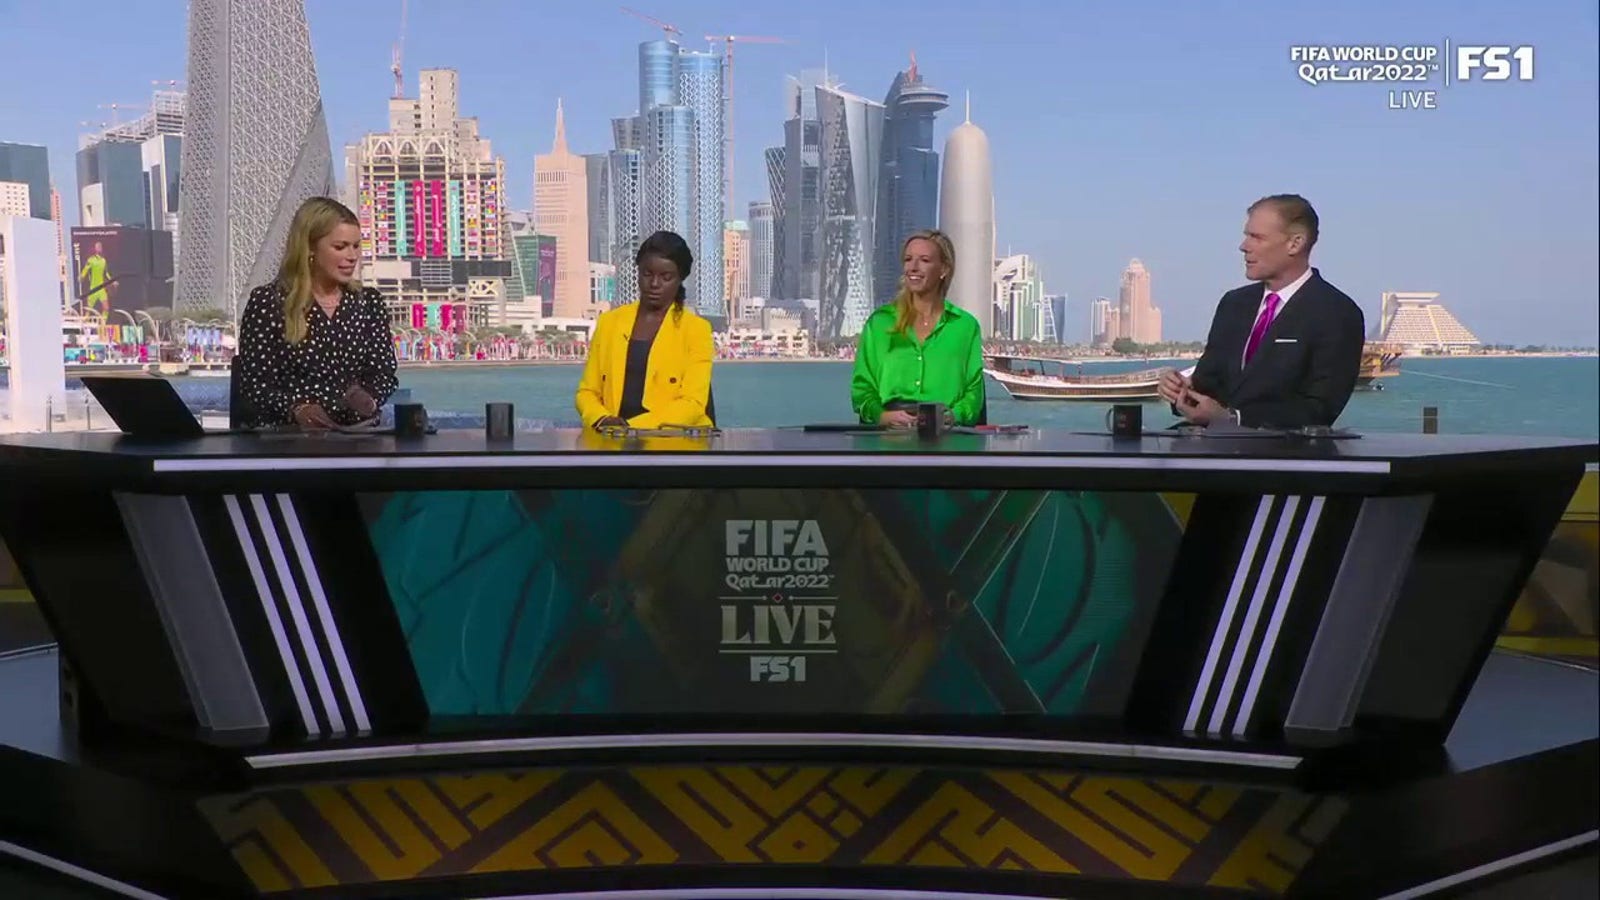 The 'FIFA World Cup Live' team talks about Lionel Messi's legacy